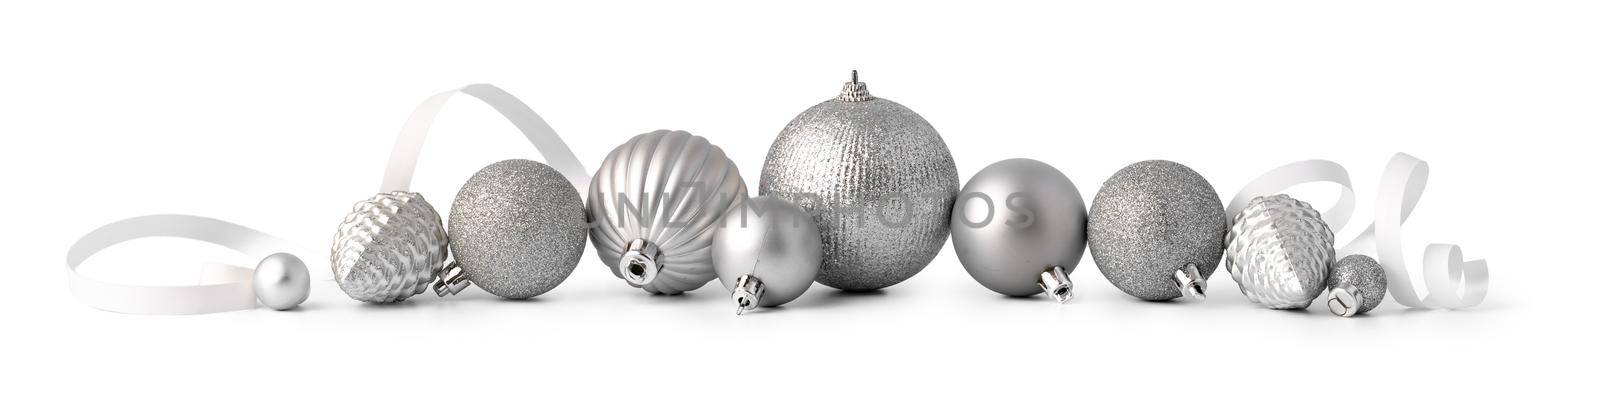 Pile of Christmas baubles isolated on white background by Fabrikasimf